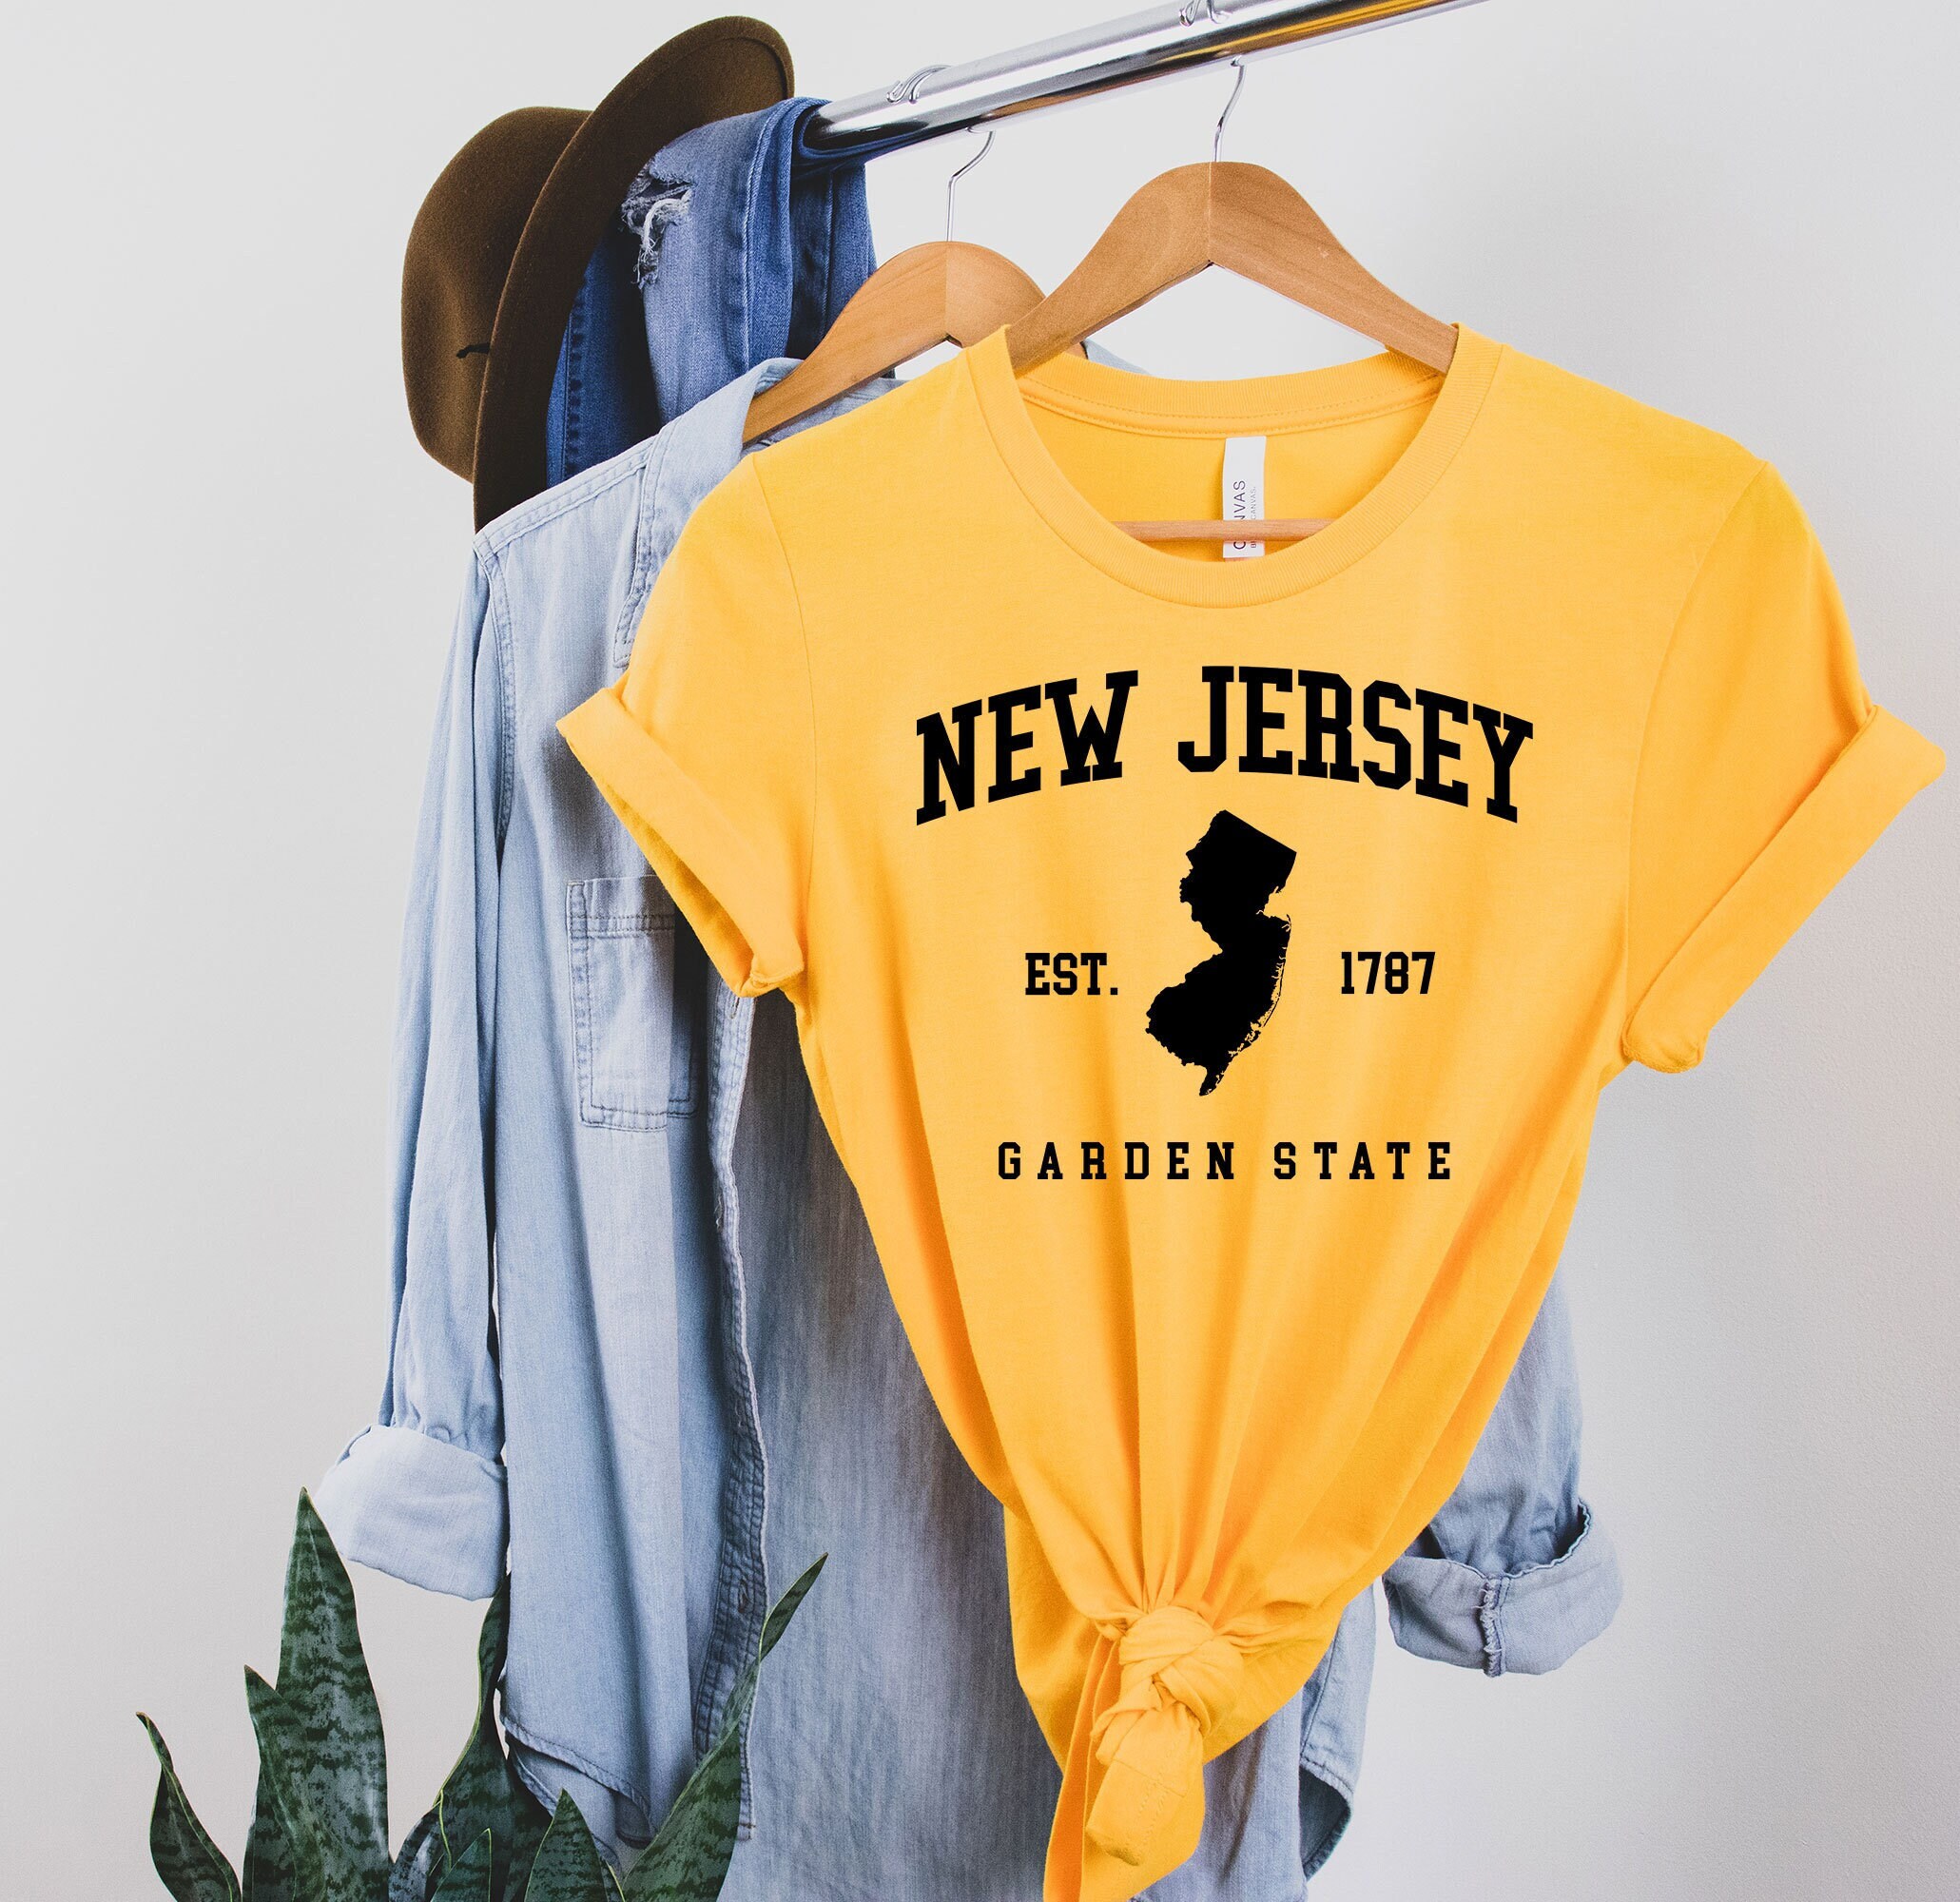 Discover New Jersey Tee,New Jersey, New Jersey Tshirt, New Jersey